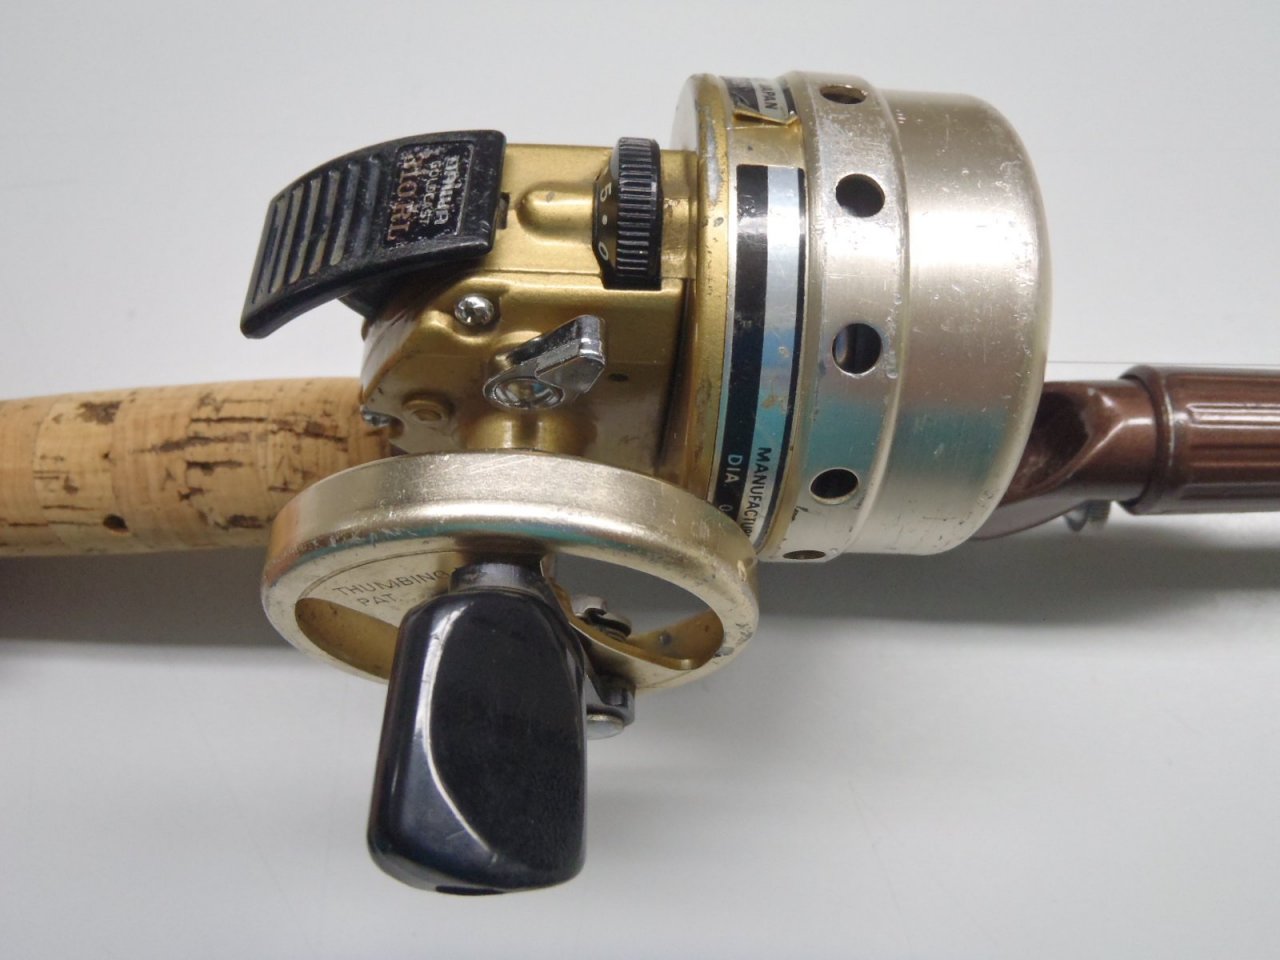 Diawa Goldcast 310 RL With Thumbing Dial